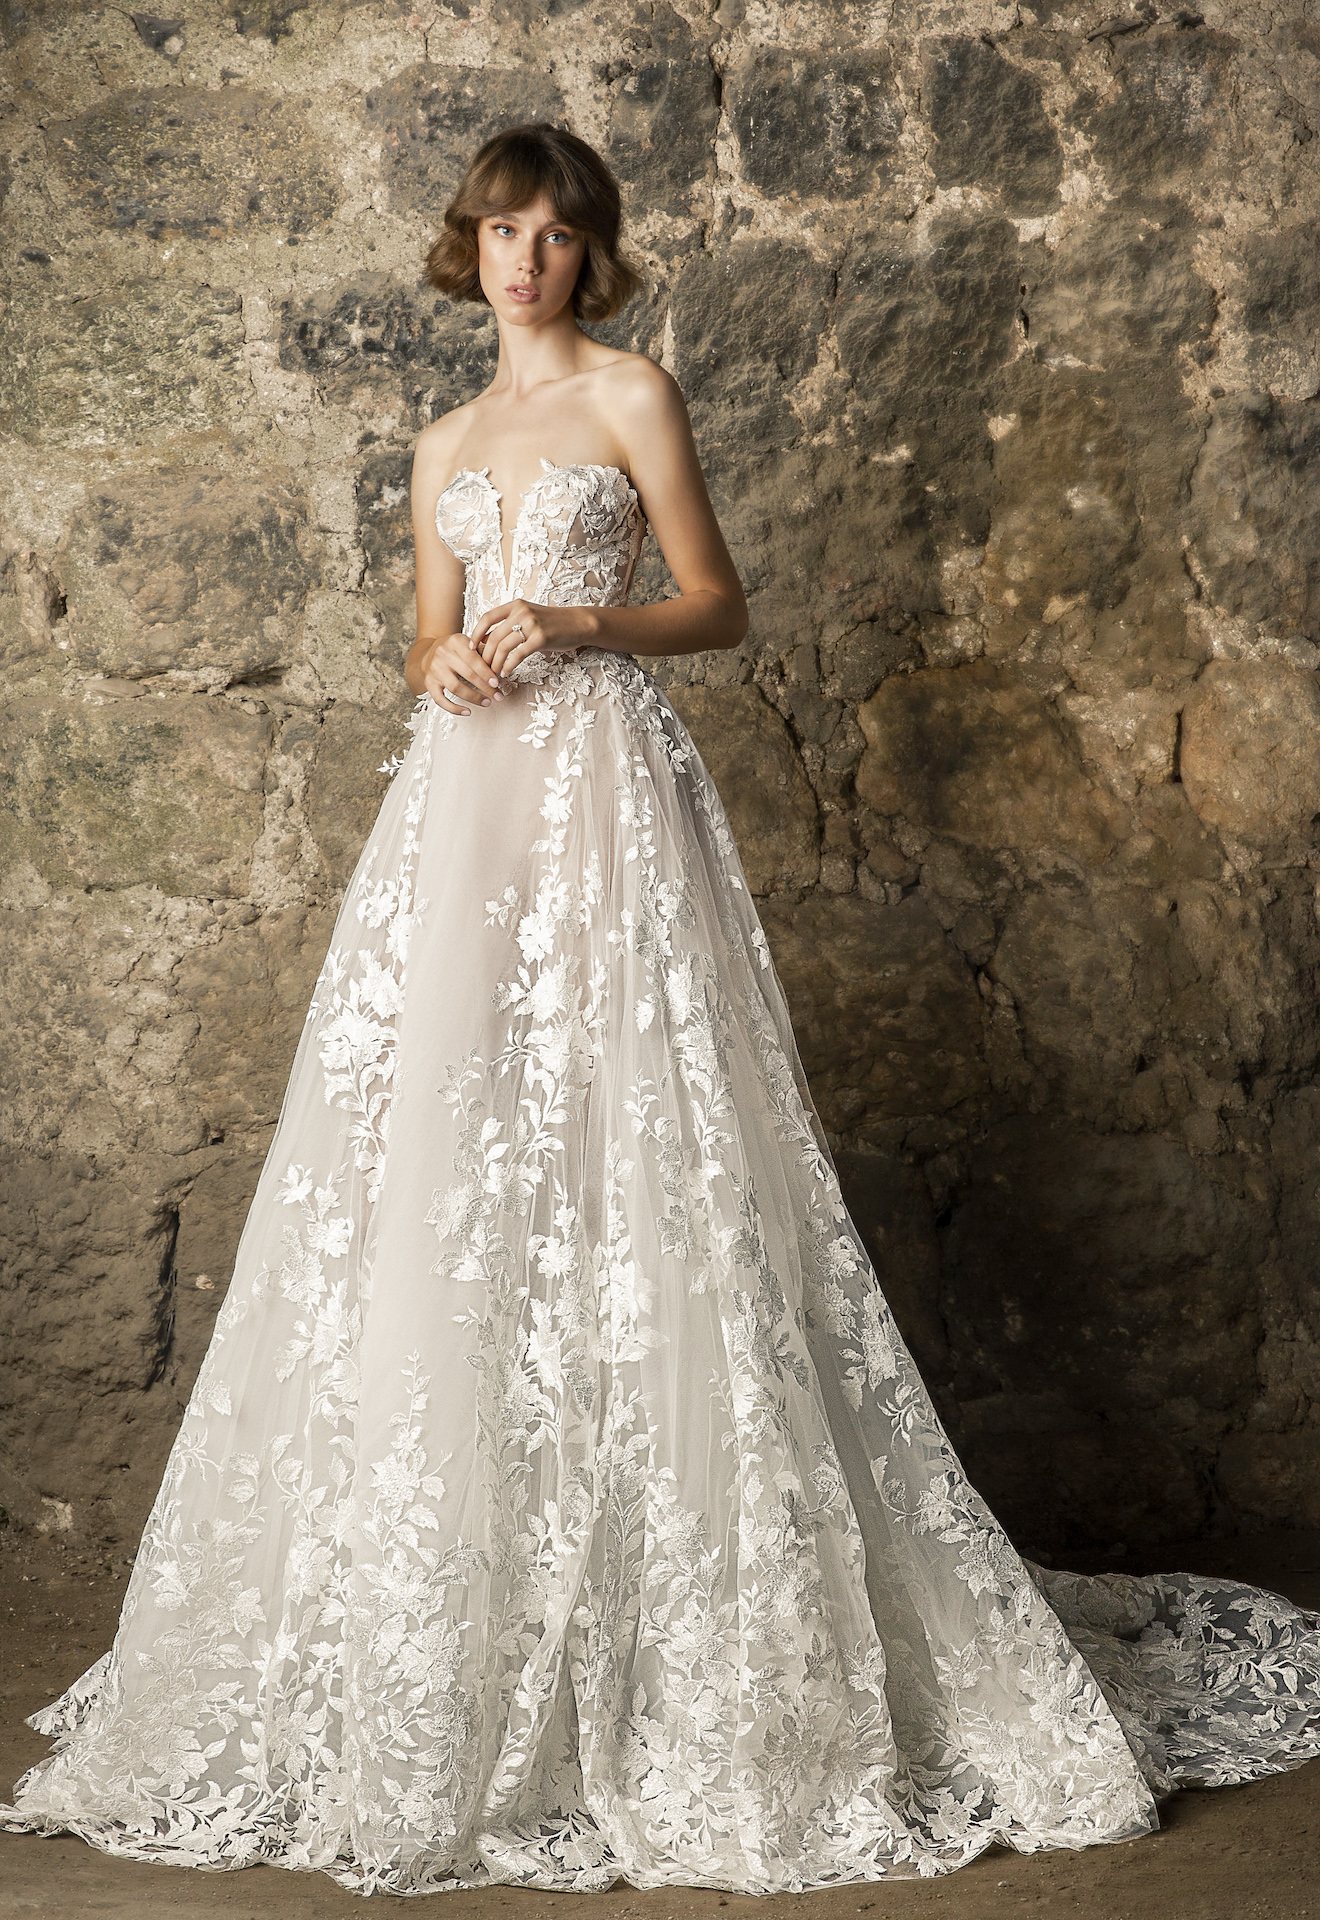 Enchanting A-Line Bridal Gown with Floral Lace